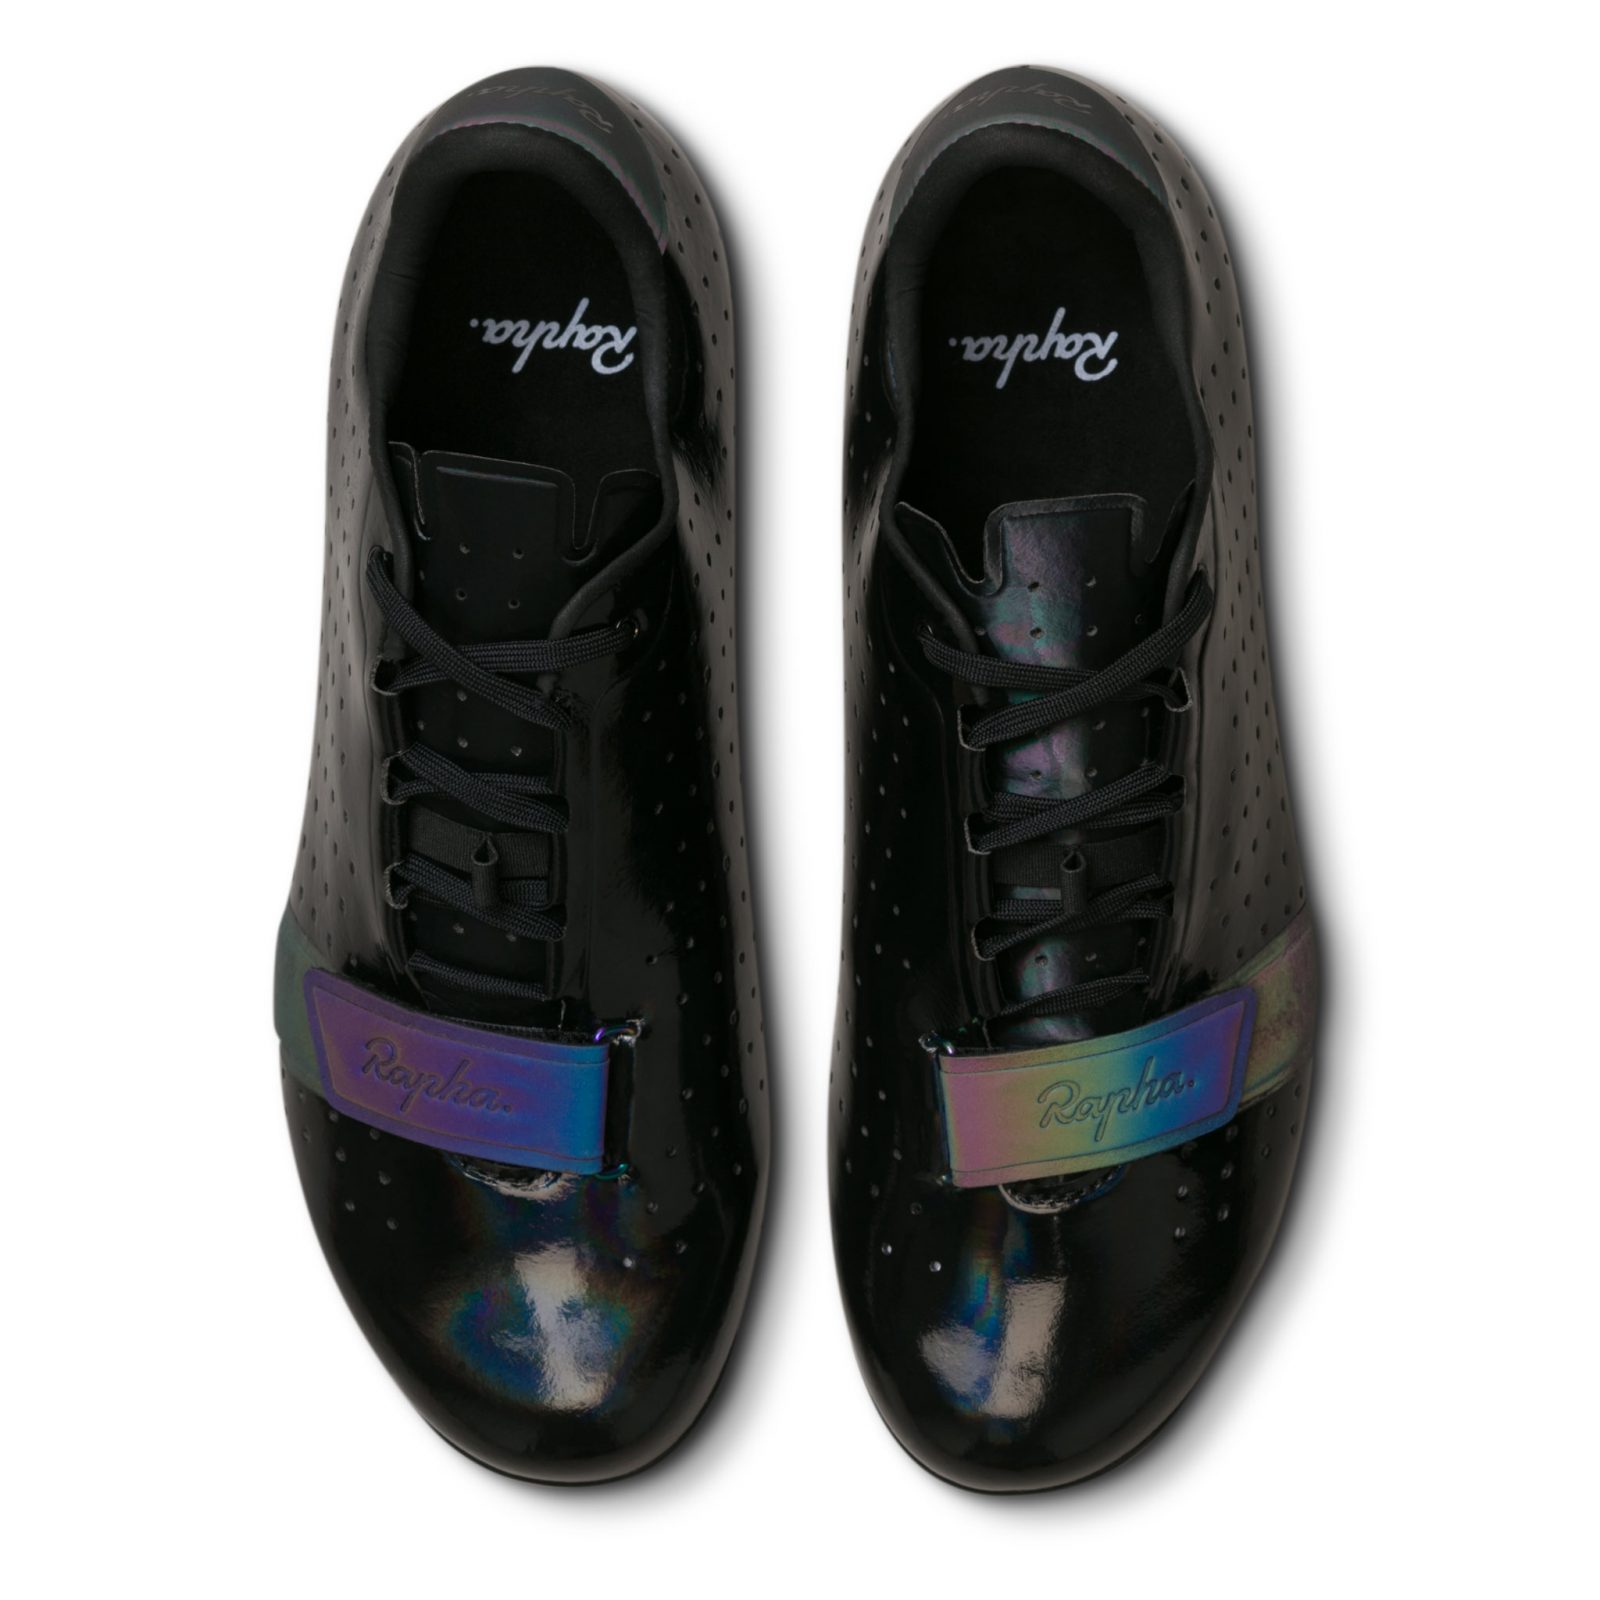 Buy rapha classic shoes black pearl> OFF-57%